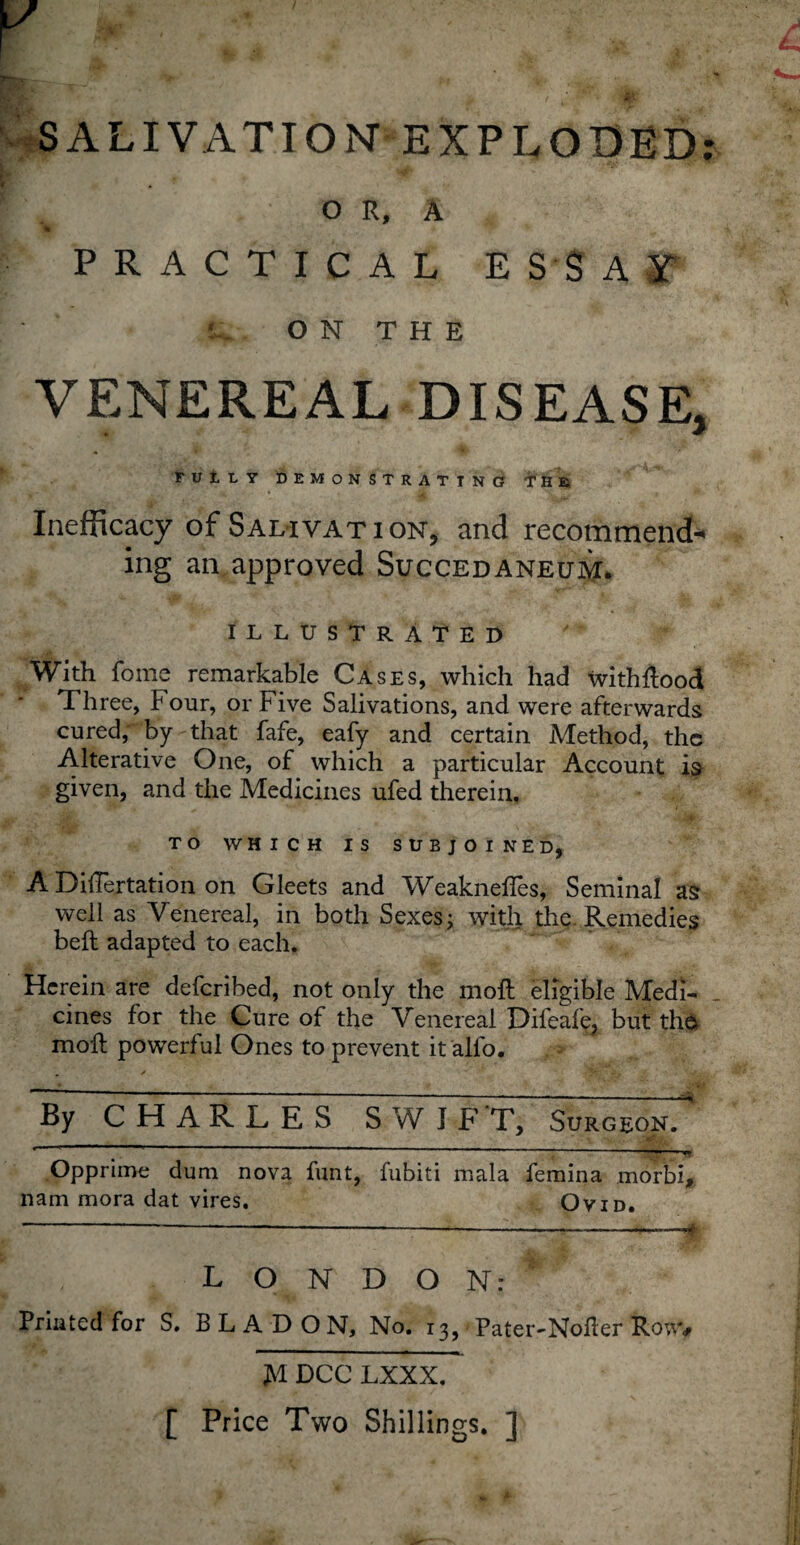 SALIVATION EXPLODED; O R, A w PRACTICAL ESSAY O N T H E VENEREAL DISEASE, FULLY DEMONSTRATING THE Inefficacy of Salivation*, and recommend-* ing an approved Succedaneum. ILLUSTRATED With fome remarkable Cases, which had withflood Three, Four, or Five Salivations, and were afterwards cured, by that fafe, eafy and certain Method, the Alterative One, of which a particular Account is given, and the Medicines ufed therein, TO WHICH IS SUBJOINED, A Dihertation on Gleets and Weakness, Seminal as well as Venereal, in both Sexes; with the Remedies belt adapted to each. Herein are defcribed, not only the molt eligible Medi¬ cines for the Cure of the Venereal Difeafe, but the moll powerful Ones to prevent it alfo. . * ¥? - y . ' By CHARLES SWIFT, Surgeon. ’ ’  ;-■» ** Opprime dum nova funt, fubiti mala femina morbi, nam mora dat vires. Ovid. - -—--——-—* LONDON: Printed for S. BLADON, No. 13, ■ Pater-Noller Rowv H DCC LXXX. [ Price Two Shillings. ]